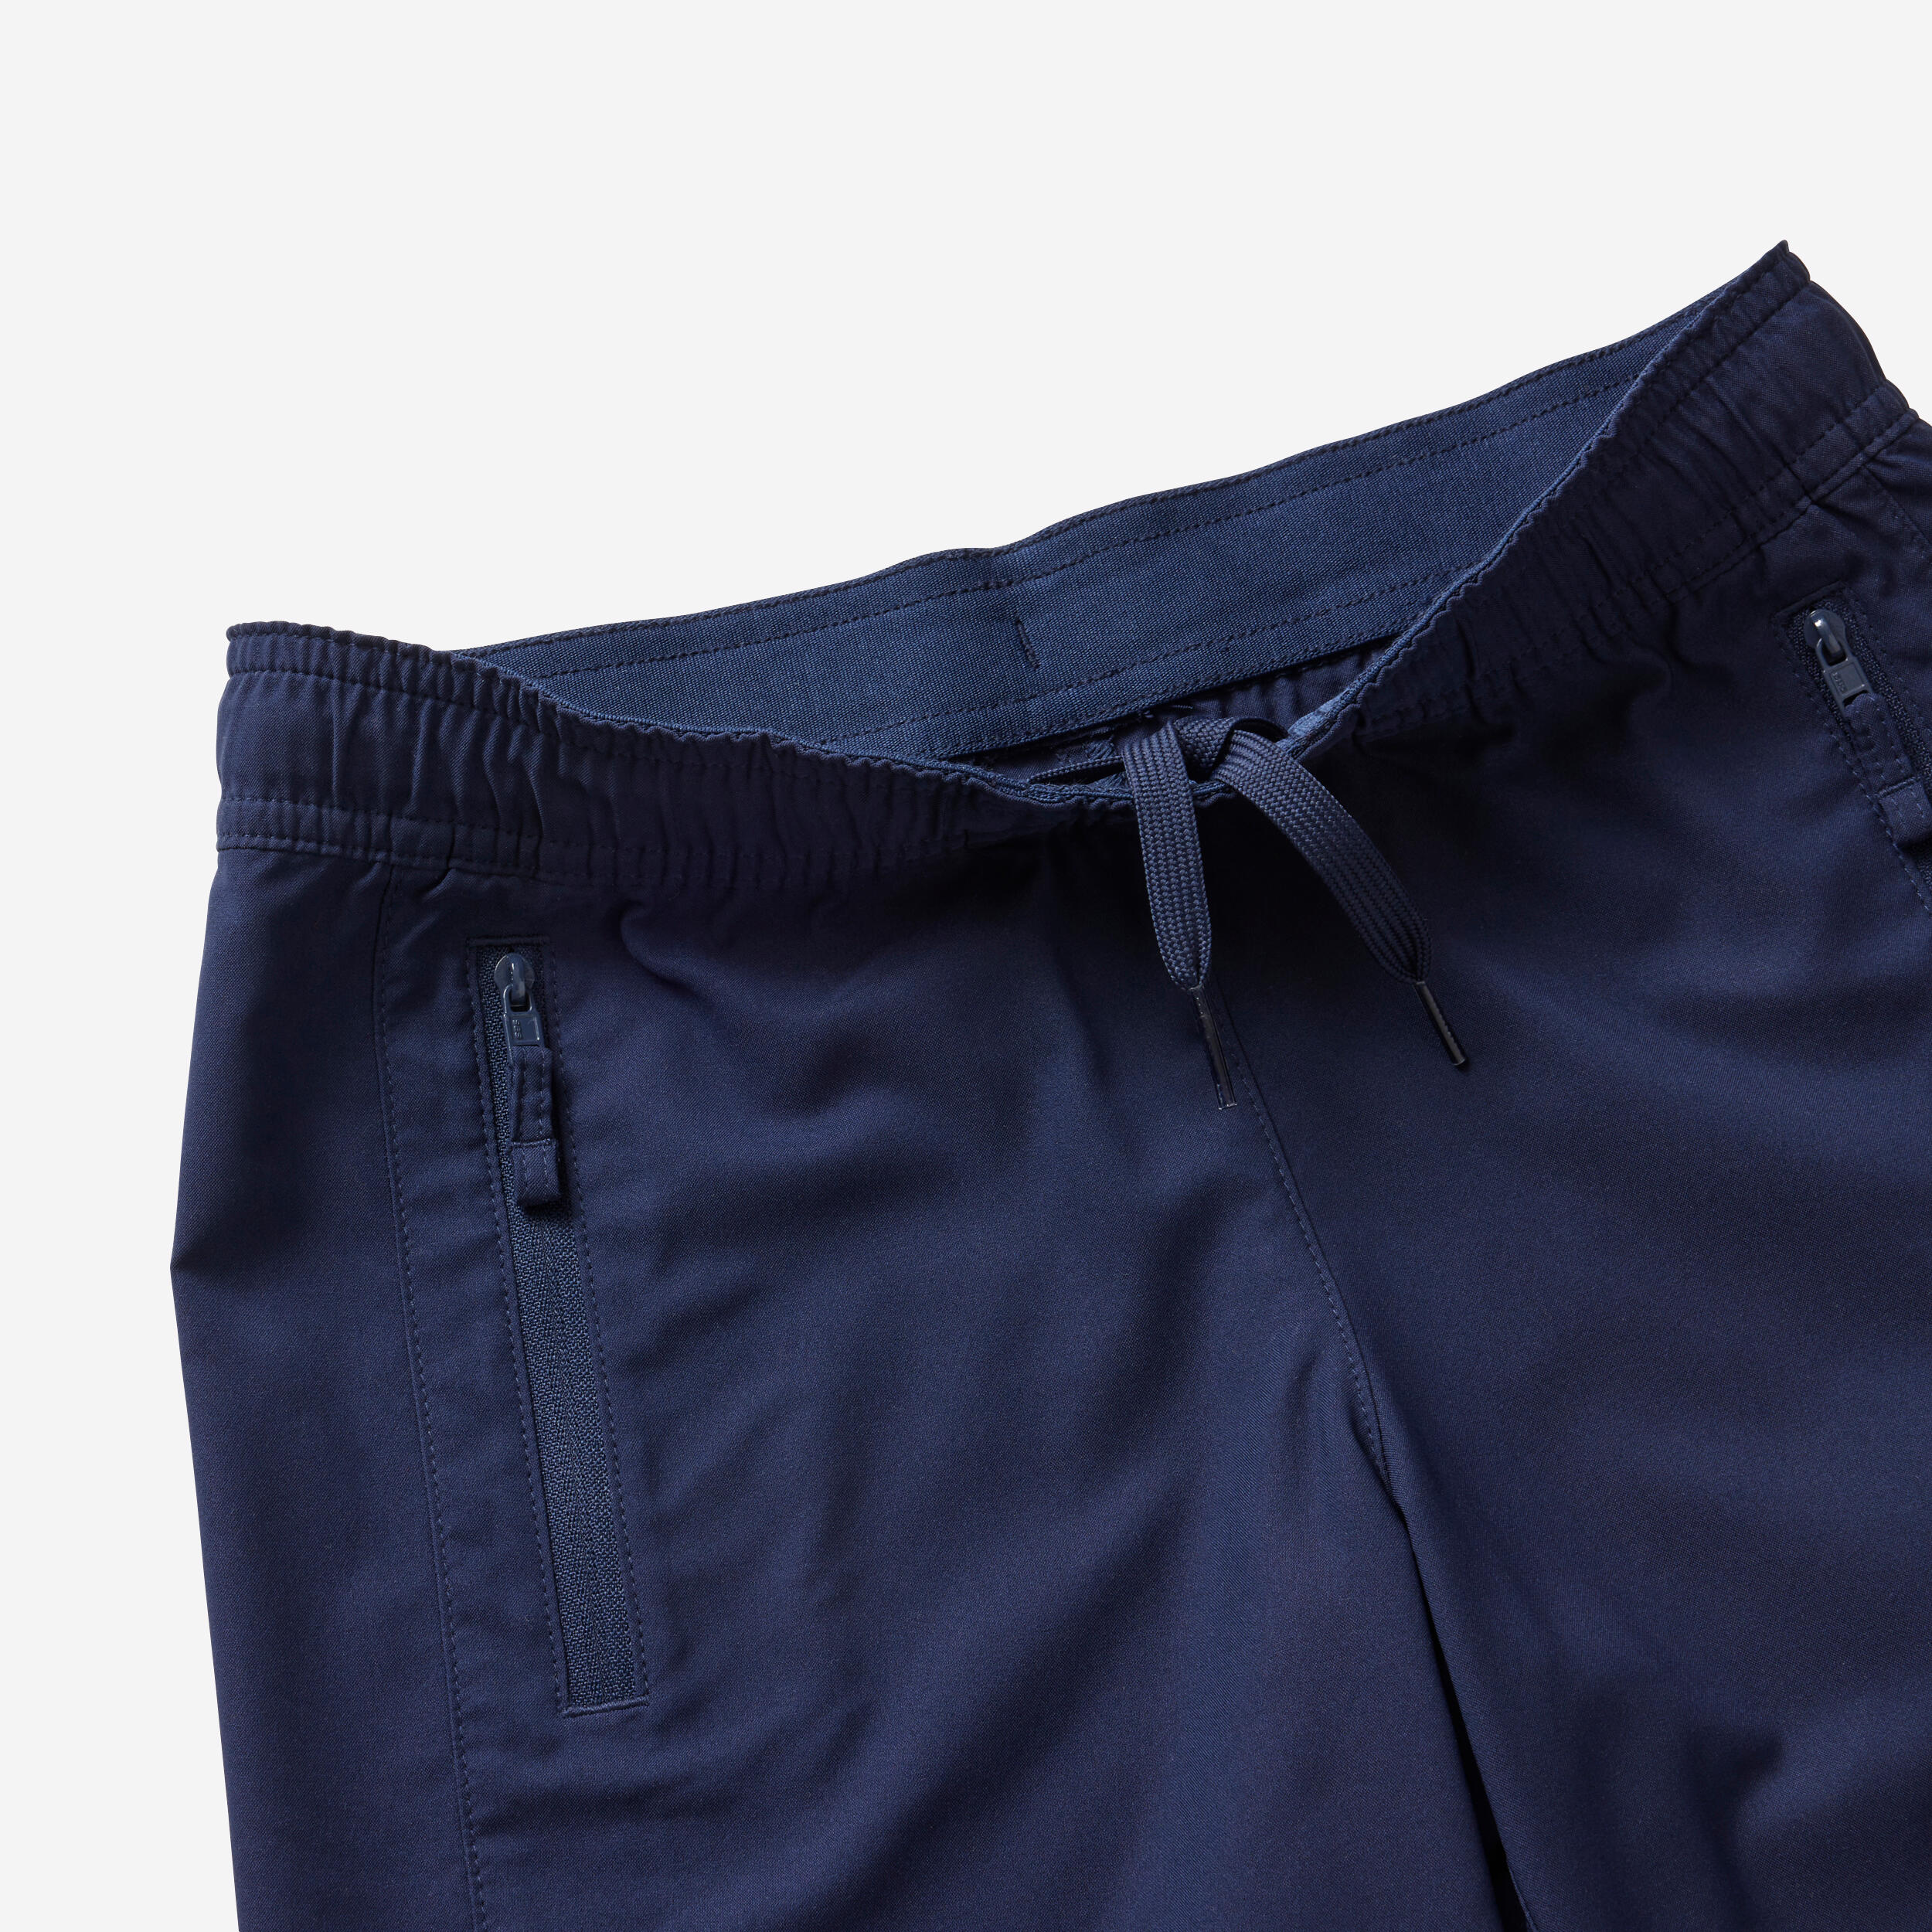 Kids' Breathable Shorts - Navy Blue 2/2